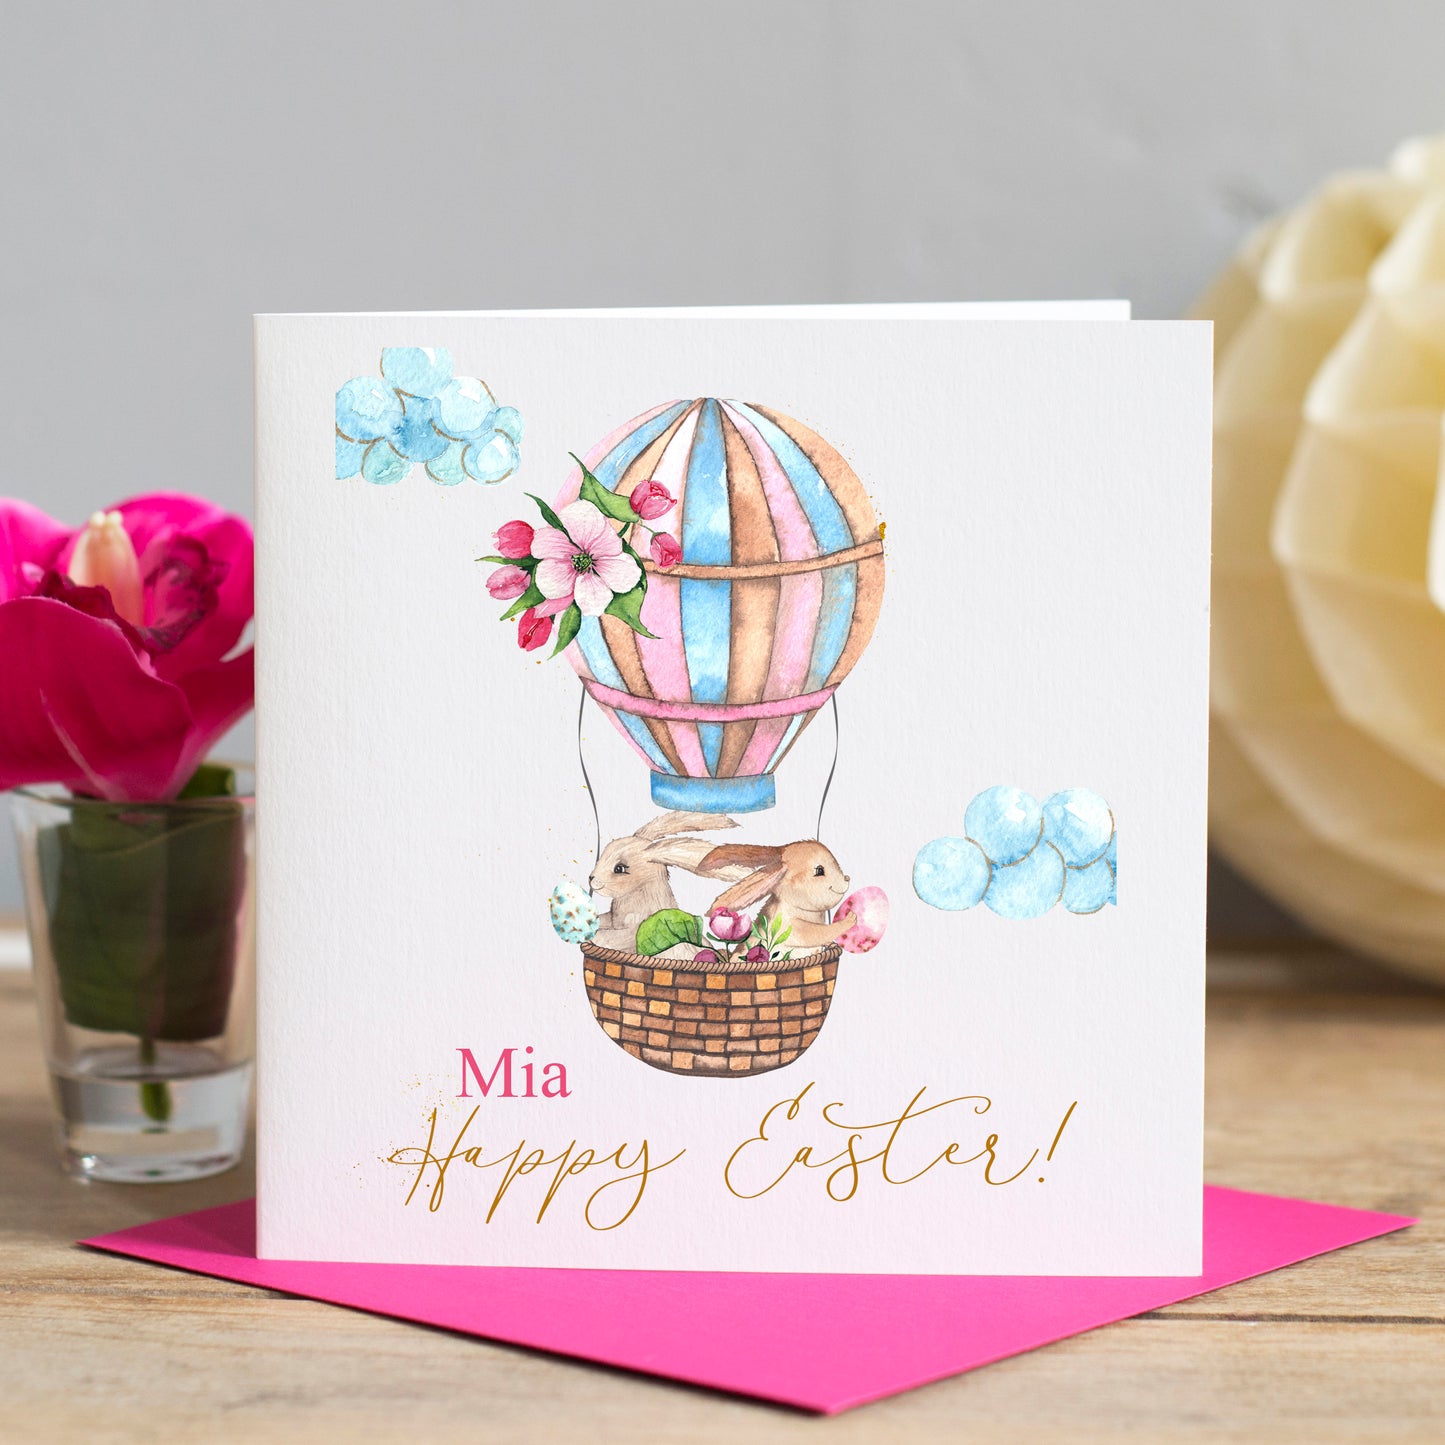 Personalised Easter Card, Hot Air Balloon